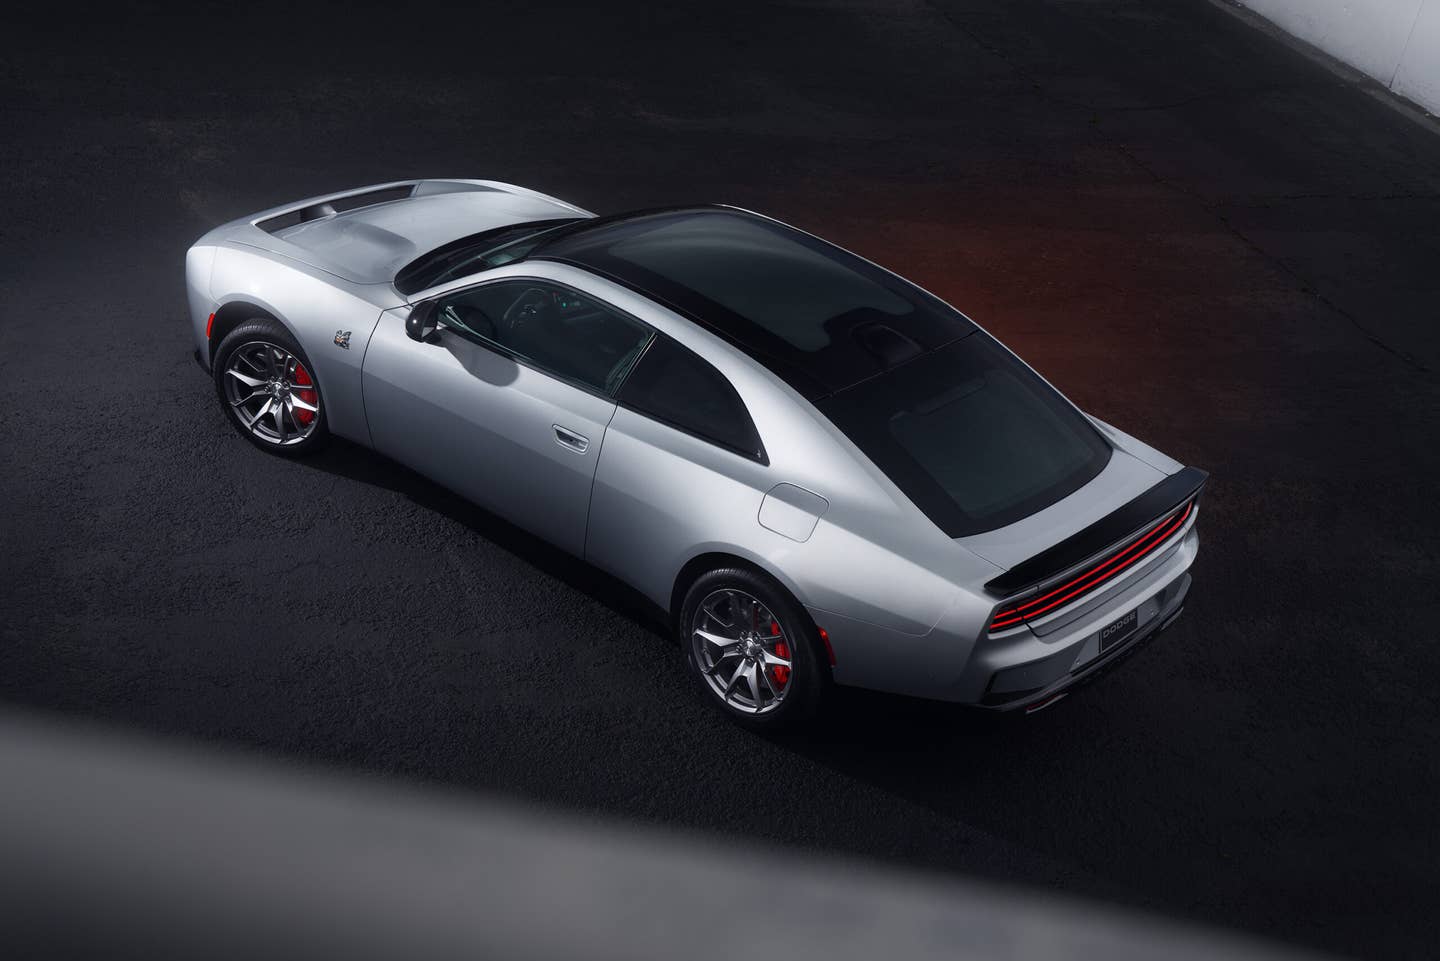 The optional full-length glass roof of the all-new Dodge Charger enhances the open-air feel of the cabin, and along with the large rear hatch provides an expansive glass canopy.